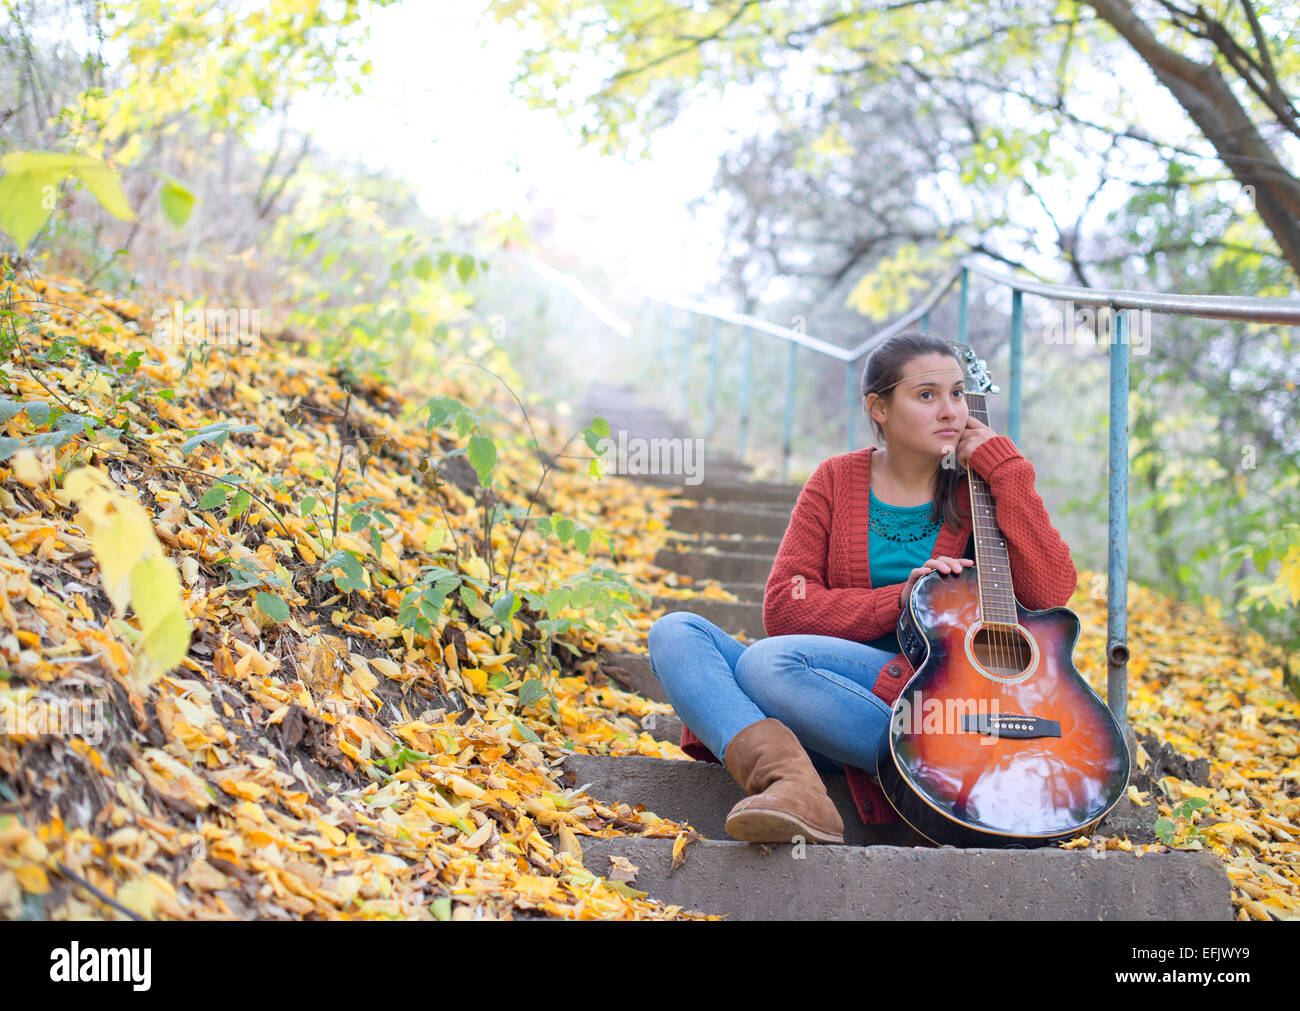 Meditative girl with her guitar Stock Photo